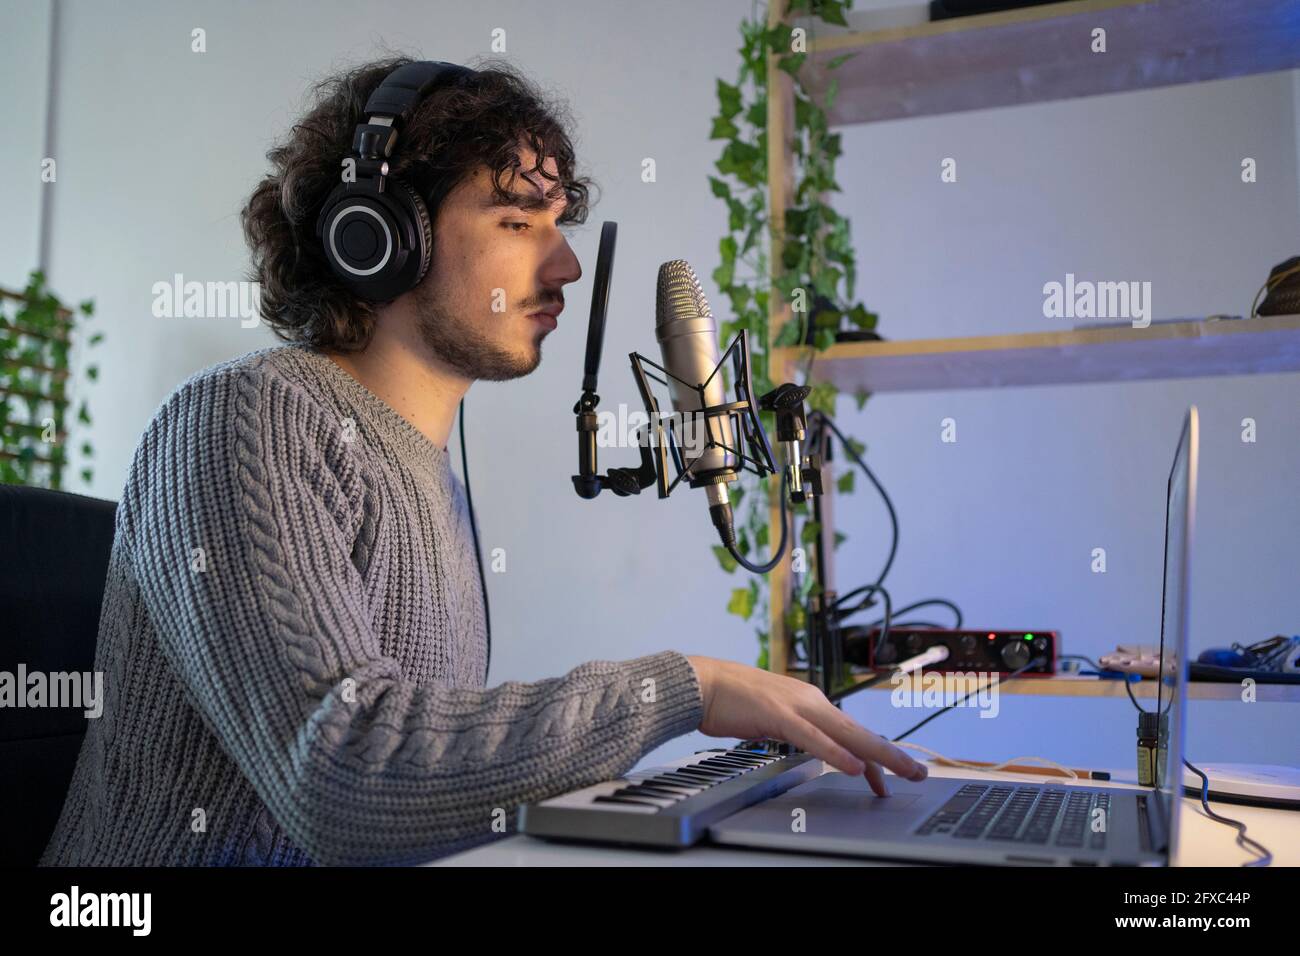 Male music composer with sound recording equipment using laptop at home Stock Photo